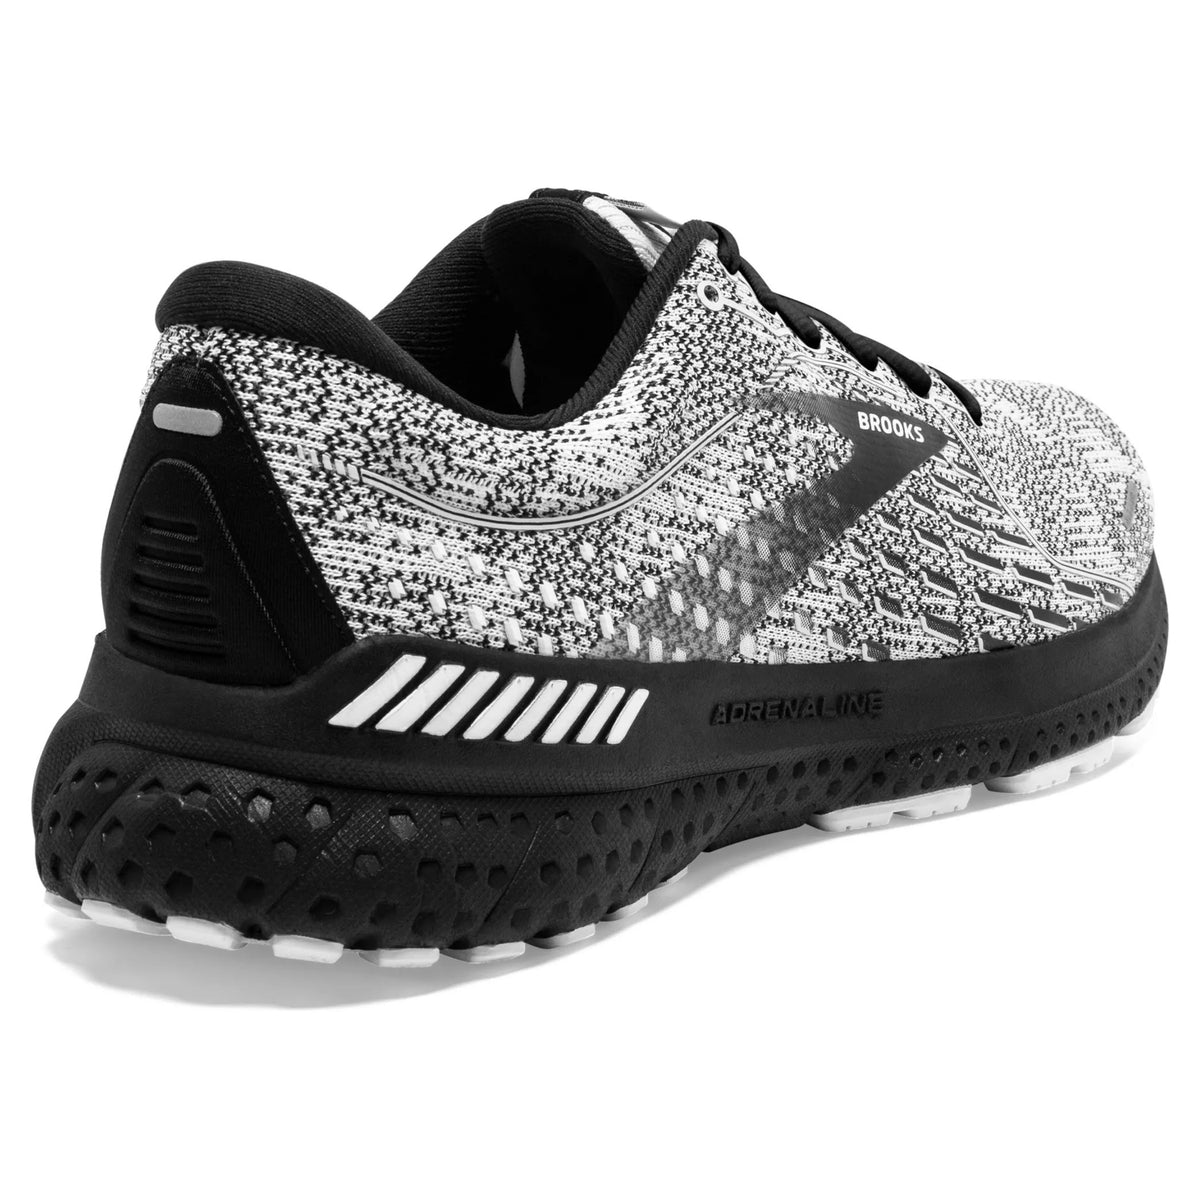 A black and white Brooks Adrenaline GTS 21 stability running shoe on a white background.